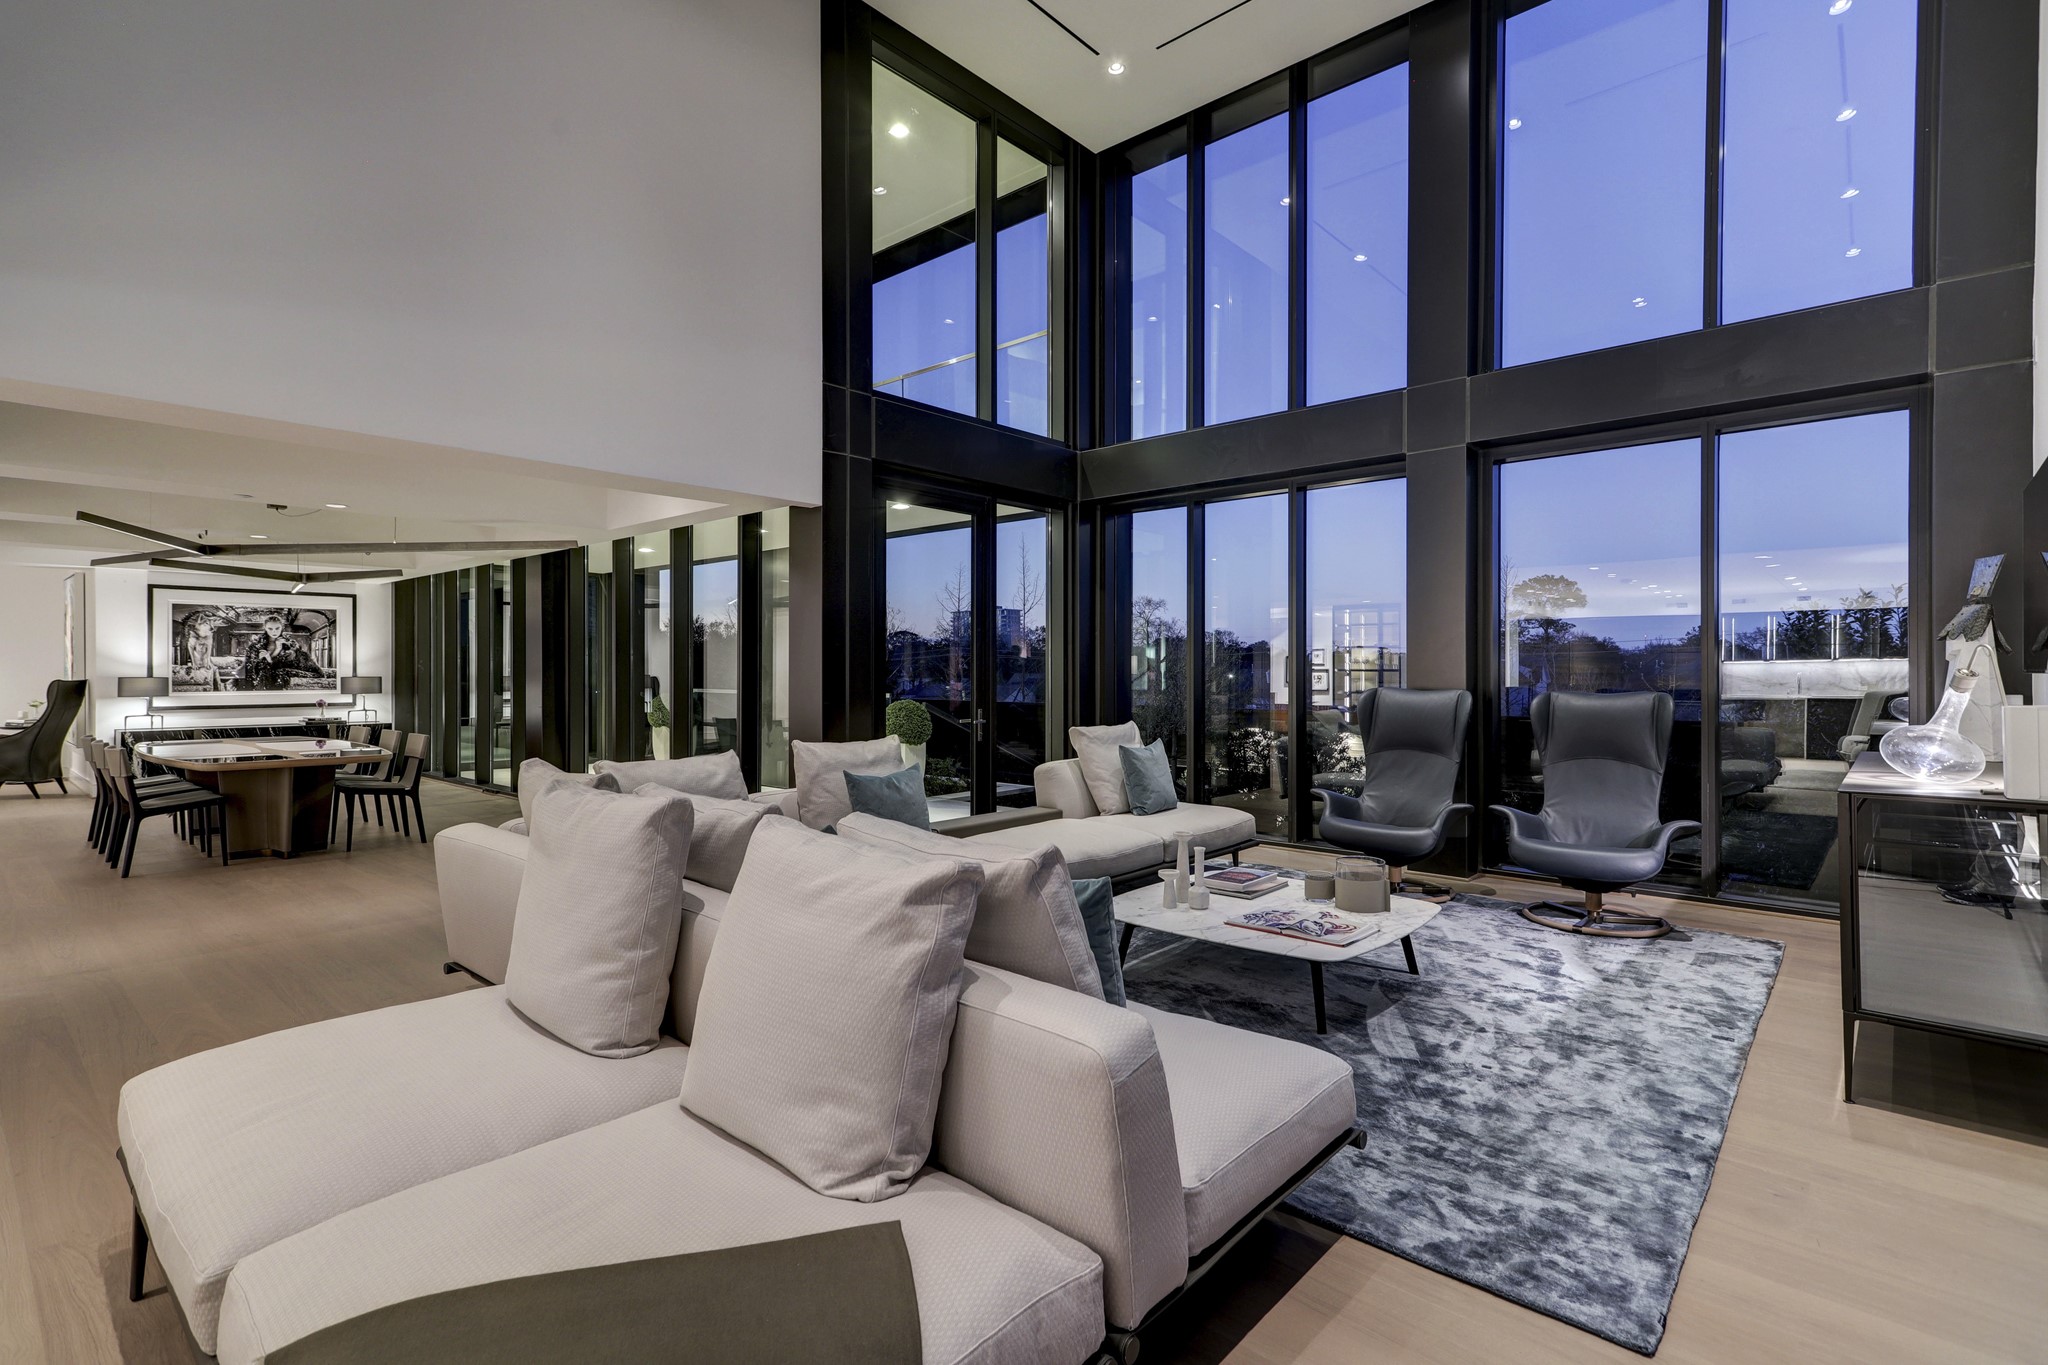 These glass doors pictured lead from the living room to the massive terrace for seamless indoor-outdoor living and entertaining.